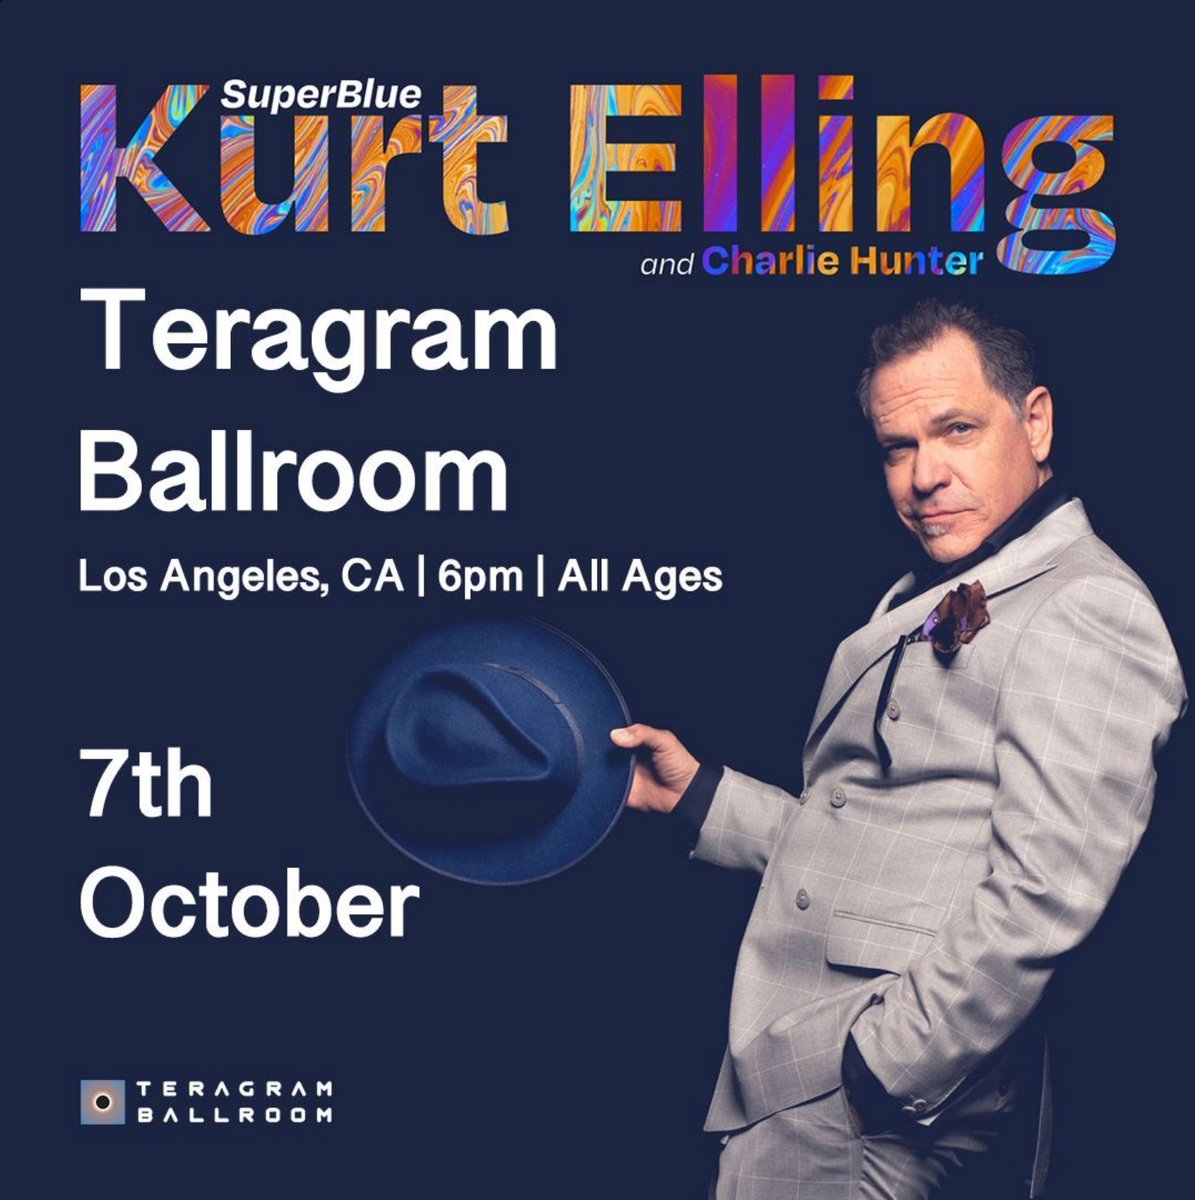 Come join us on October 7th for an unforgettable night at the Teragram Ballroom! SuperBlue presents Kurt Elling and Charlie Hunter 😍 Doors open at 6pm and all ages are welcome. Don't miss this incredible collaboration between two of the jazz world's brightest stars! 🌟